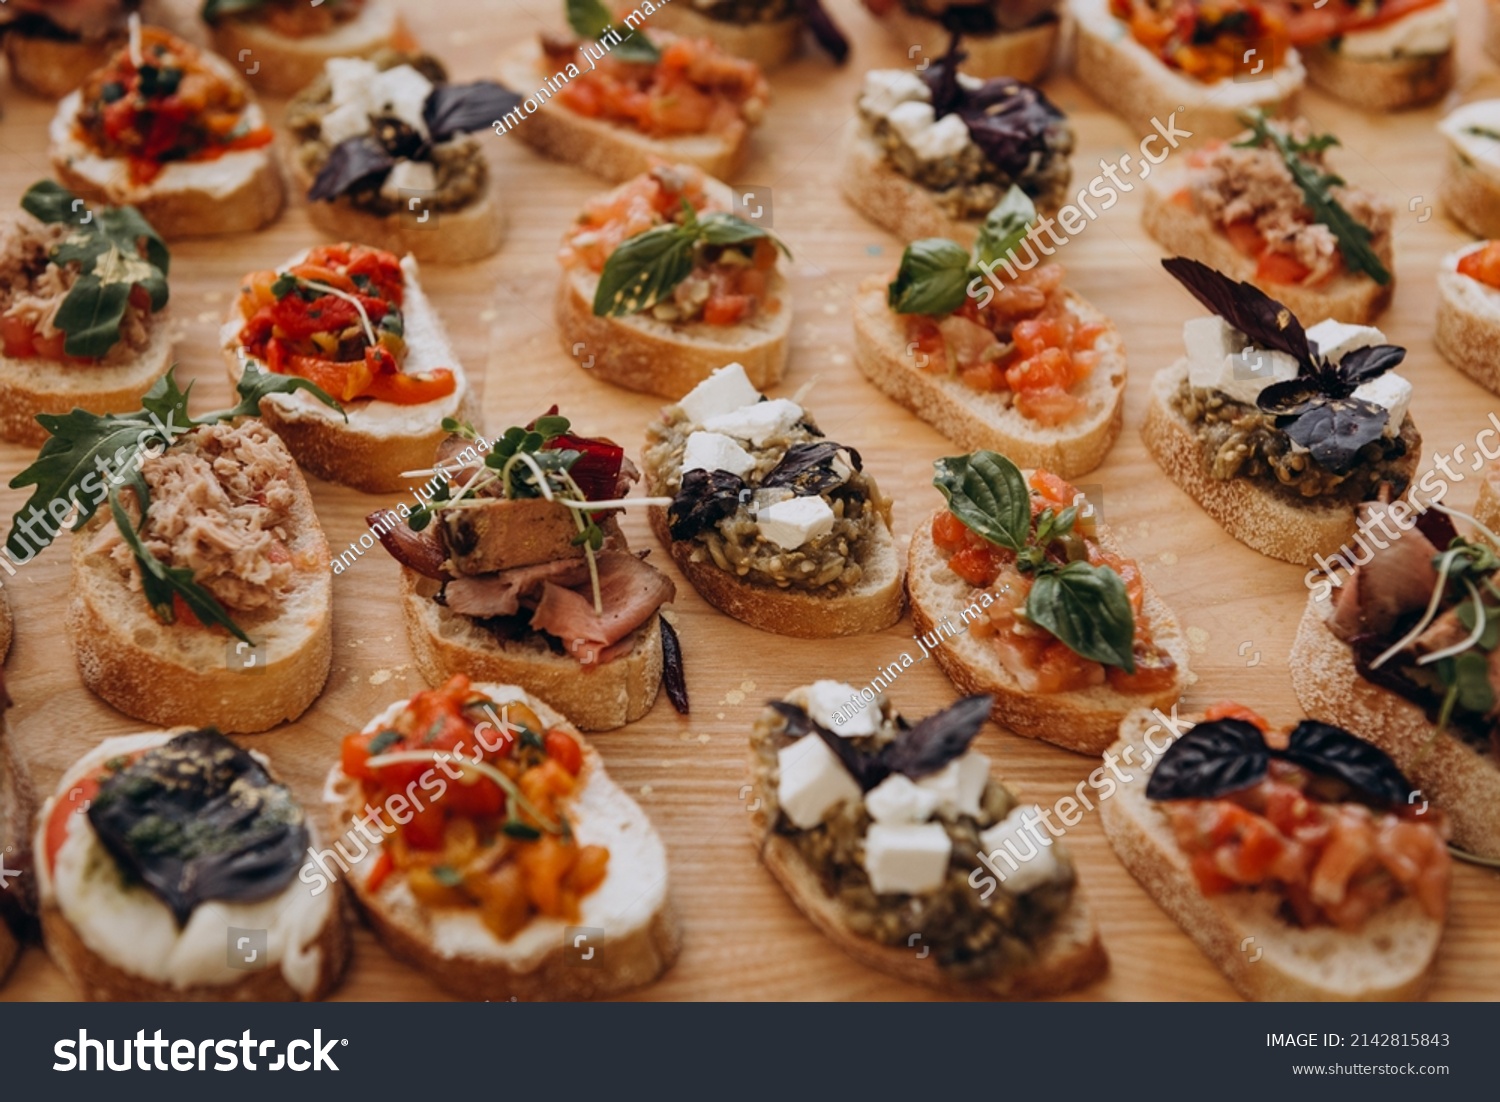 Appetizer - appetizer to wake up the appetite. Sandwiches on the table: bruschetta with butter, fish, cheese, mozzarella, tomatoes, basil #2142815843